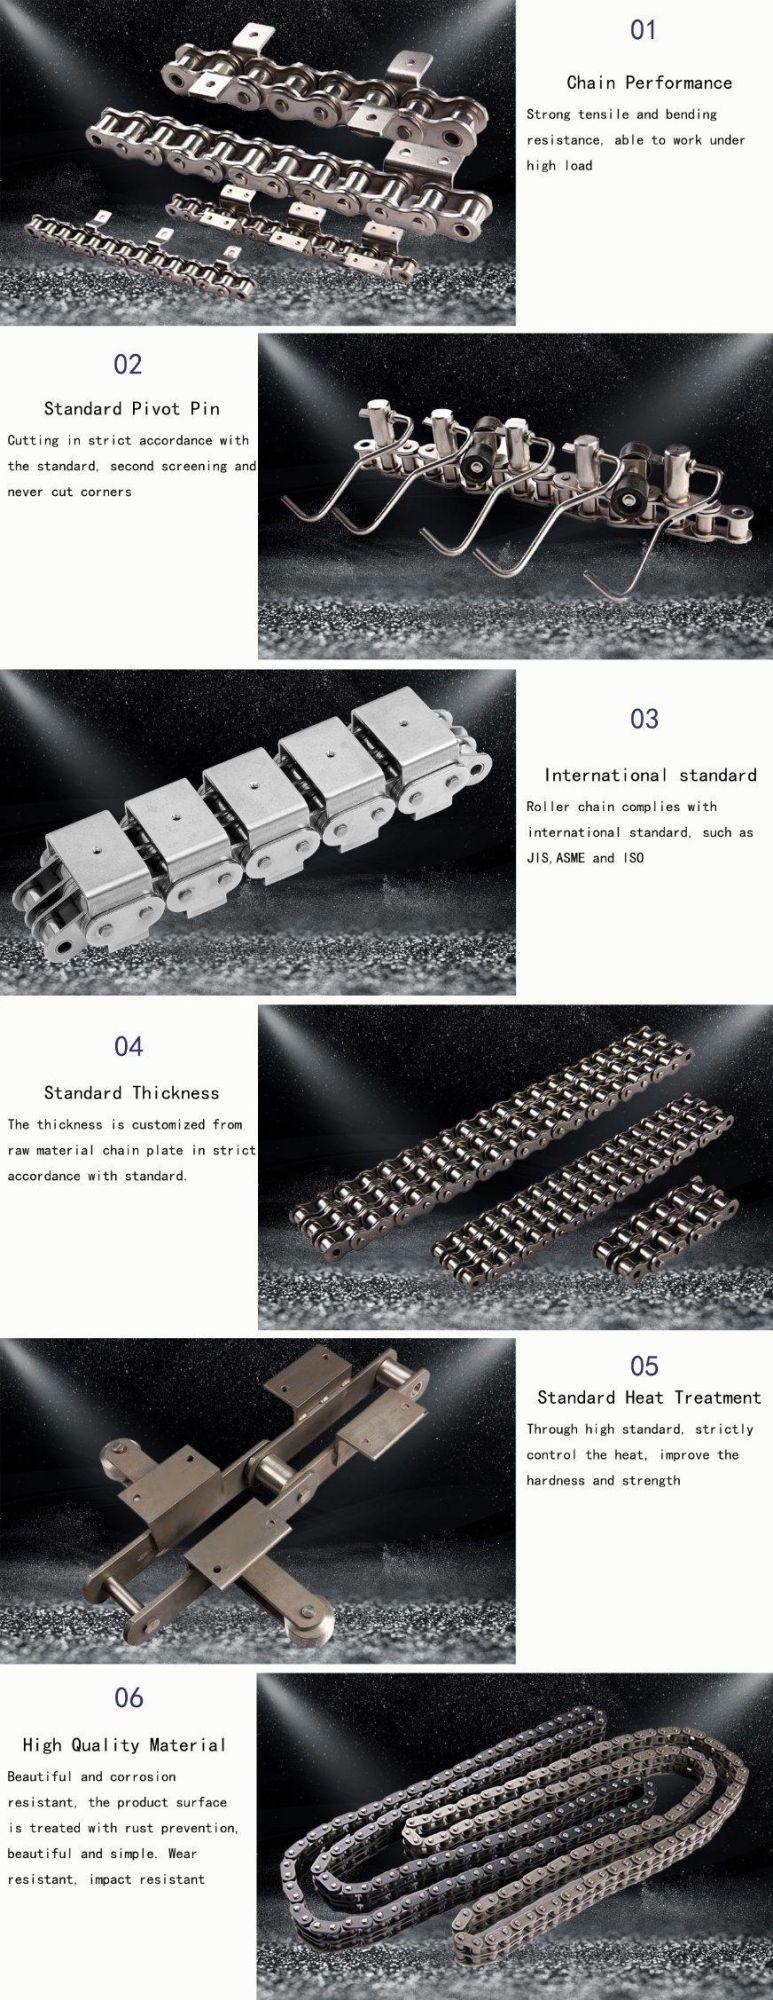 Souring Mt Series Conveyor Roller Chains Manufacturer From China